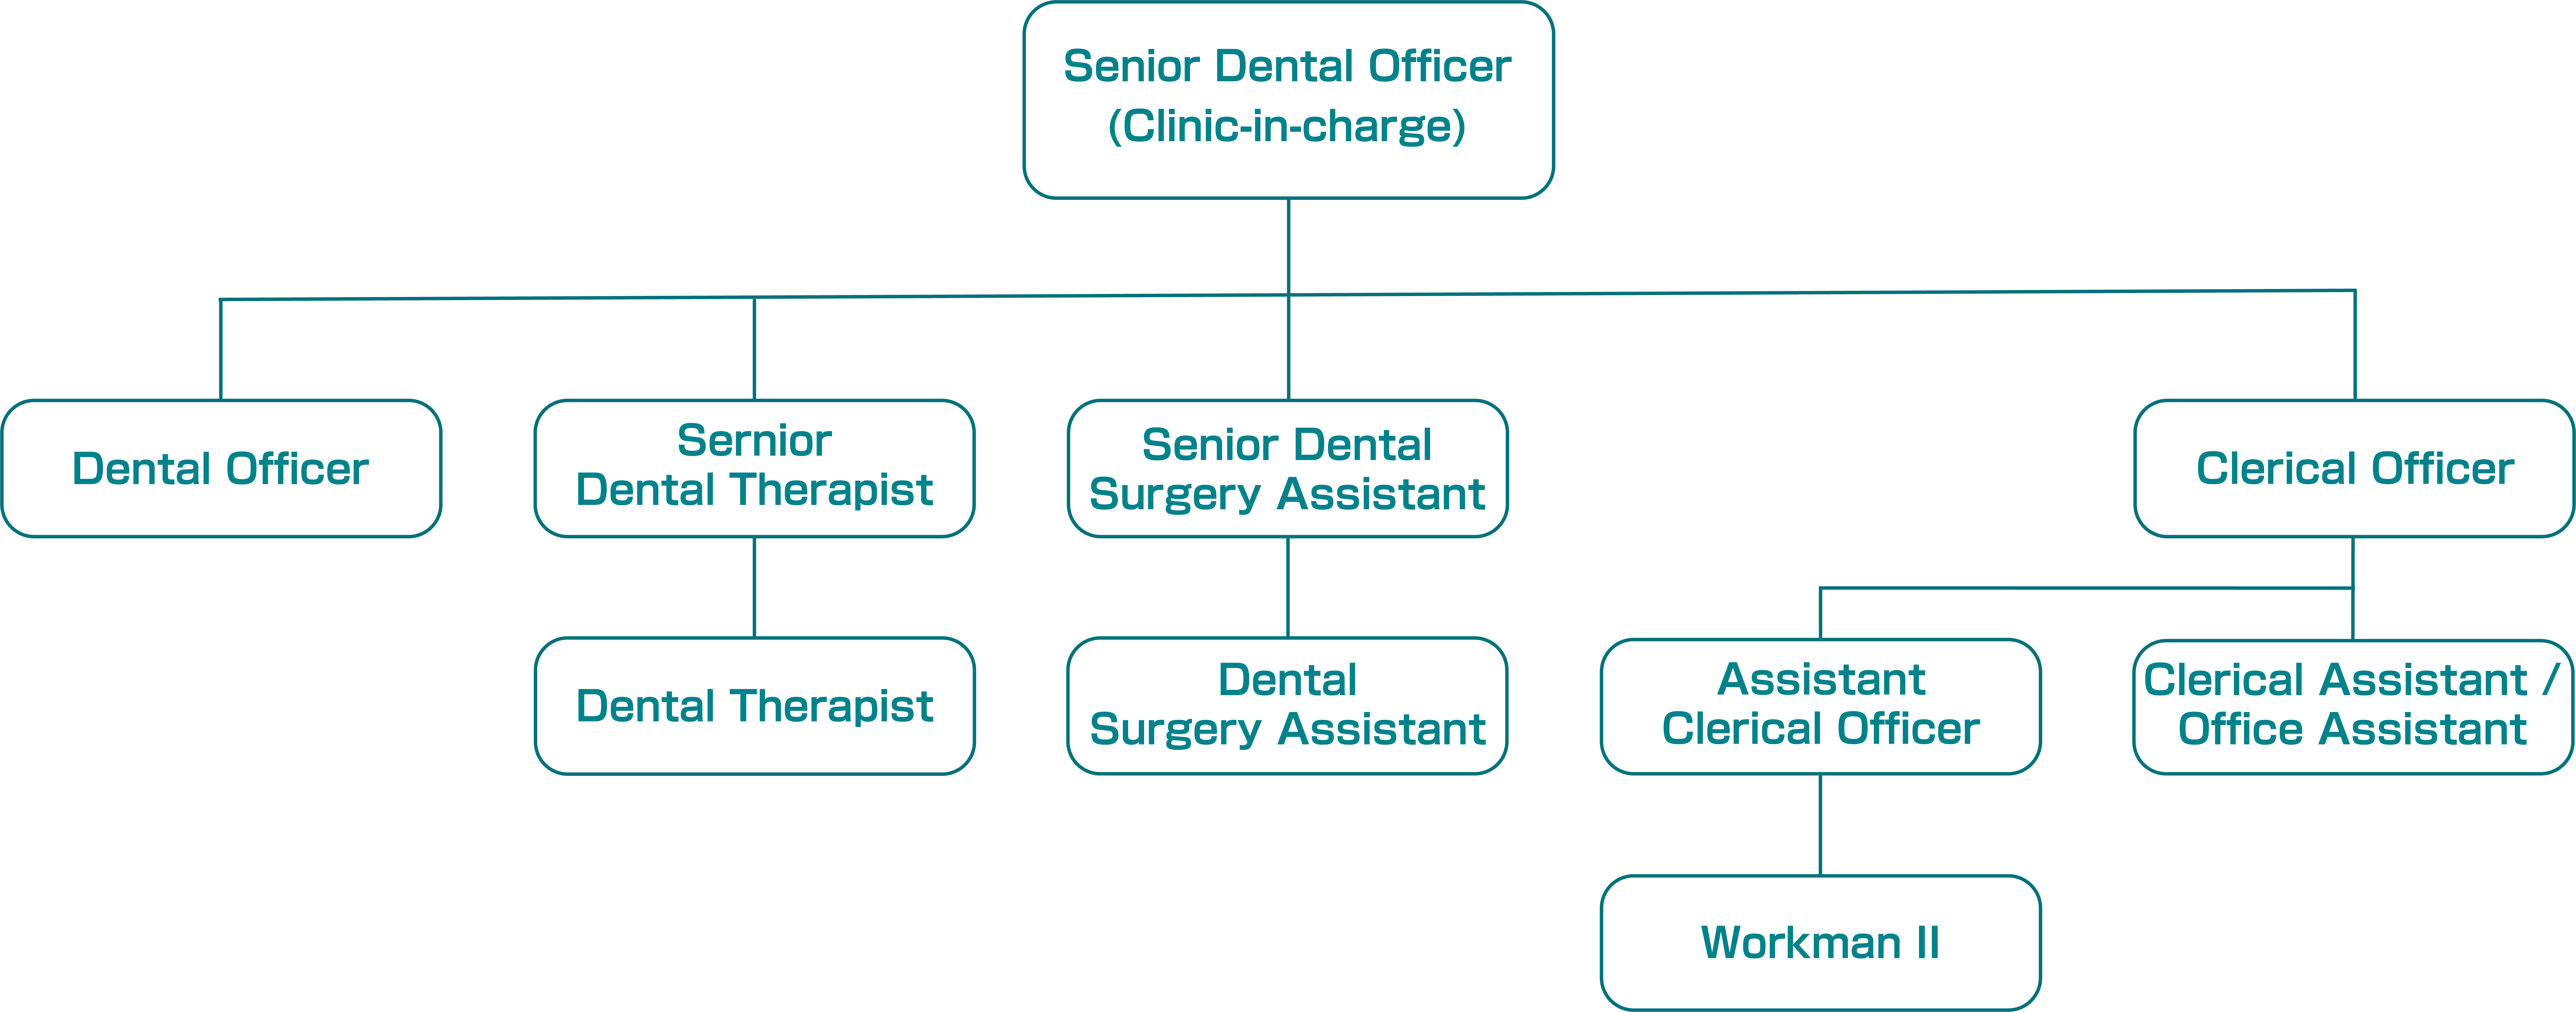 Organization chart showing the senior dental officer in-charge and his subordinates including dental officers, senior dental therapists, dental therapists, senior dental surgery assistant, dental surgery assistants, clerical staff and workmen.